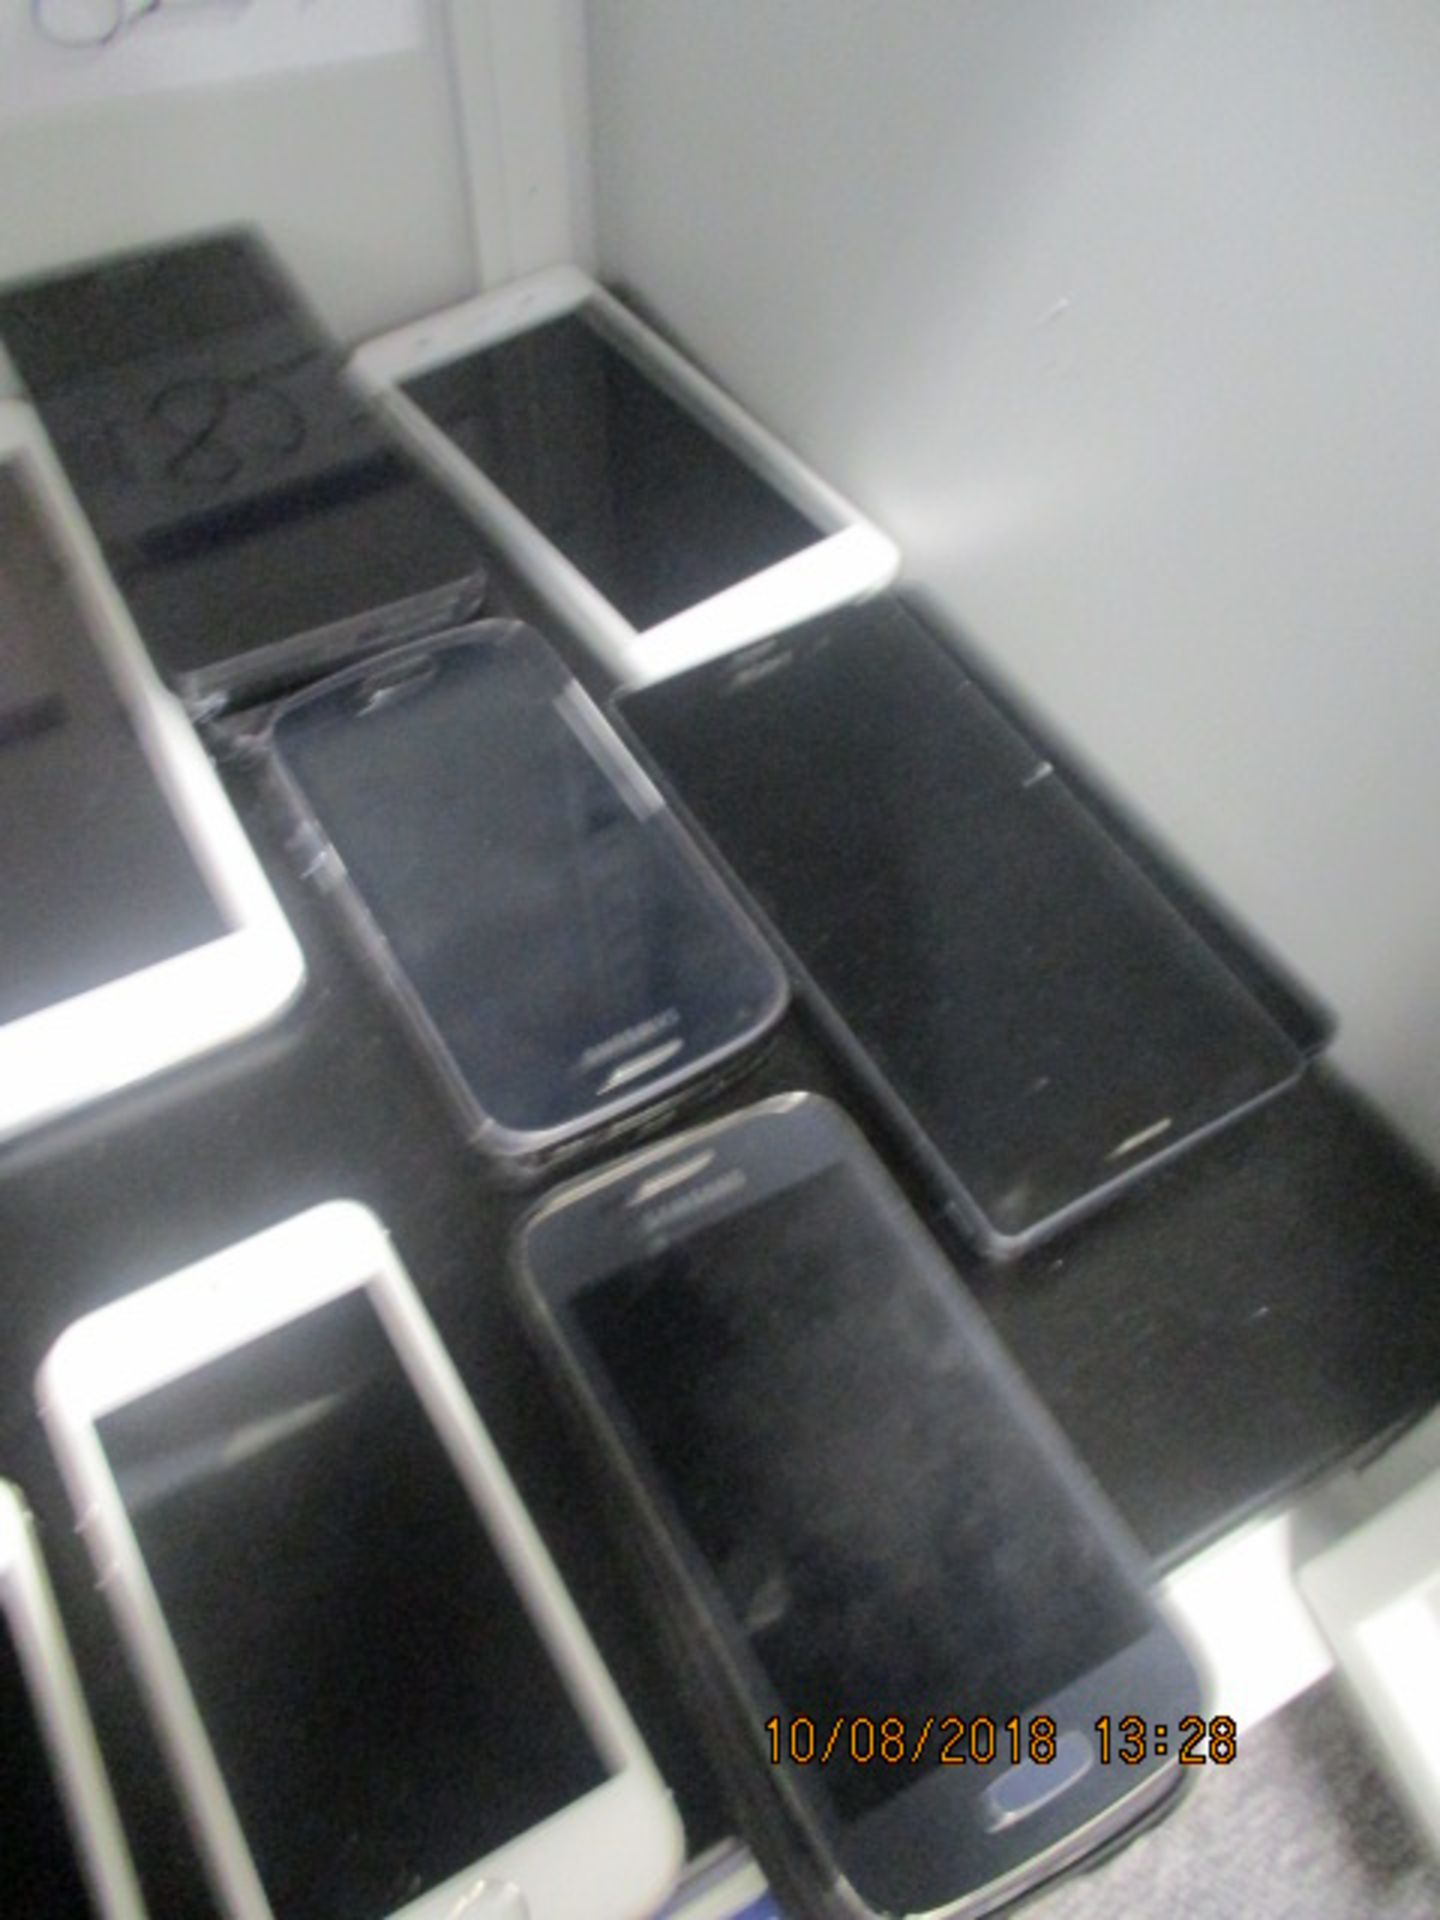 Assorted Smart Phones by Samsung, and Sony